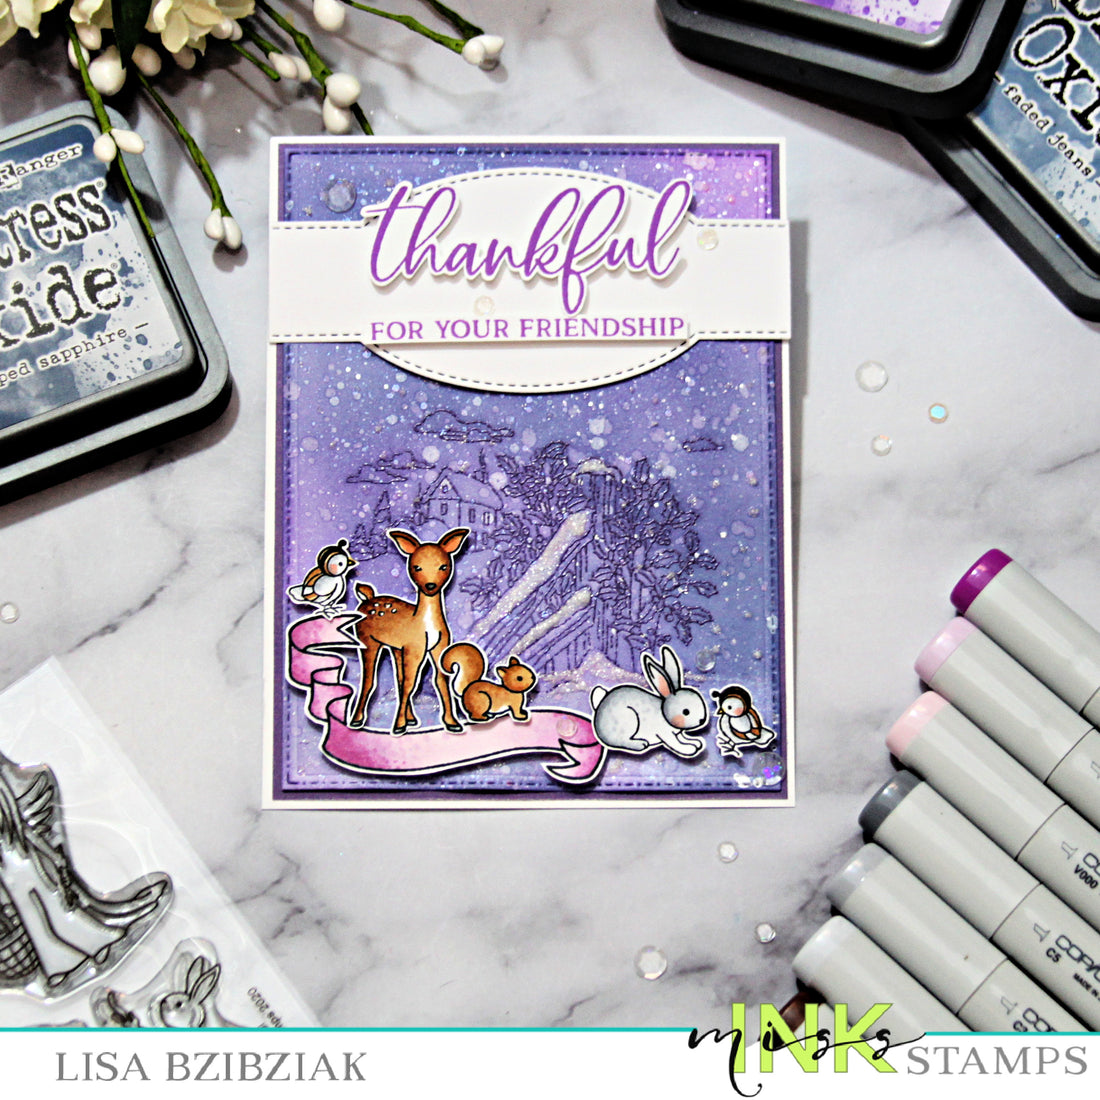 Mixing It Up - Easy Way to Use Background Stamps